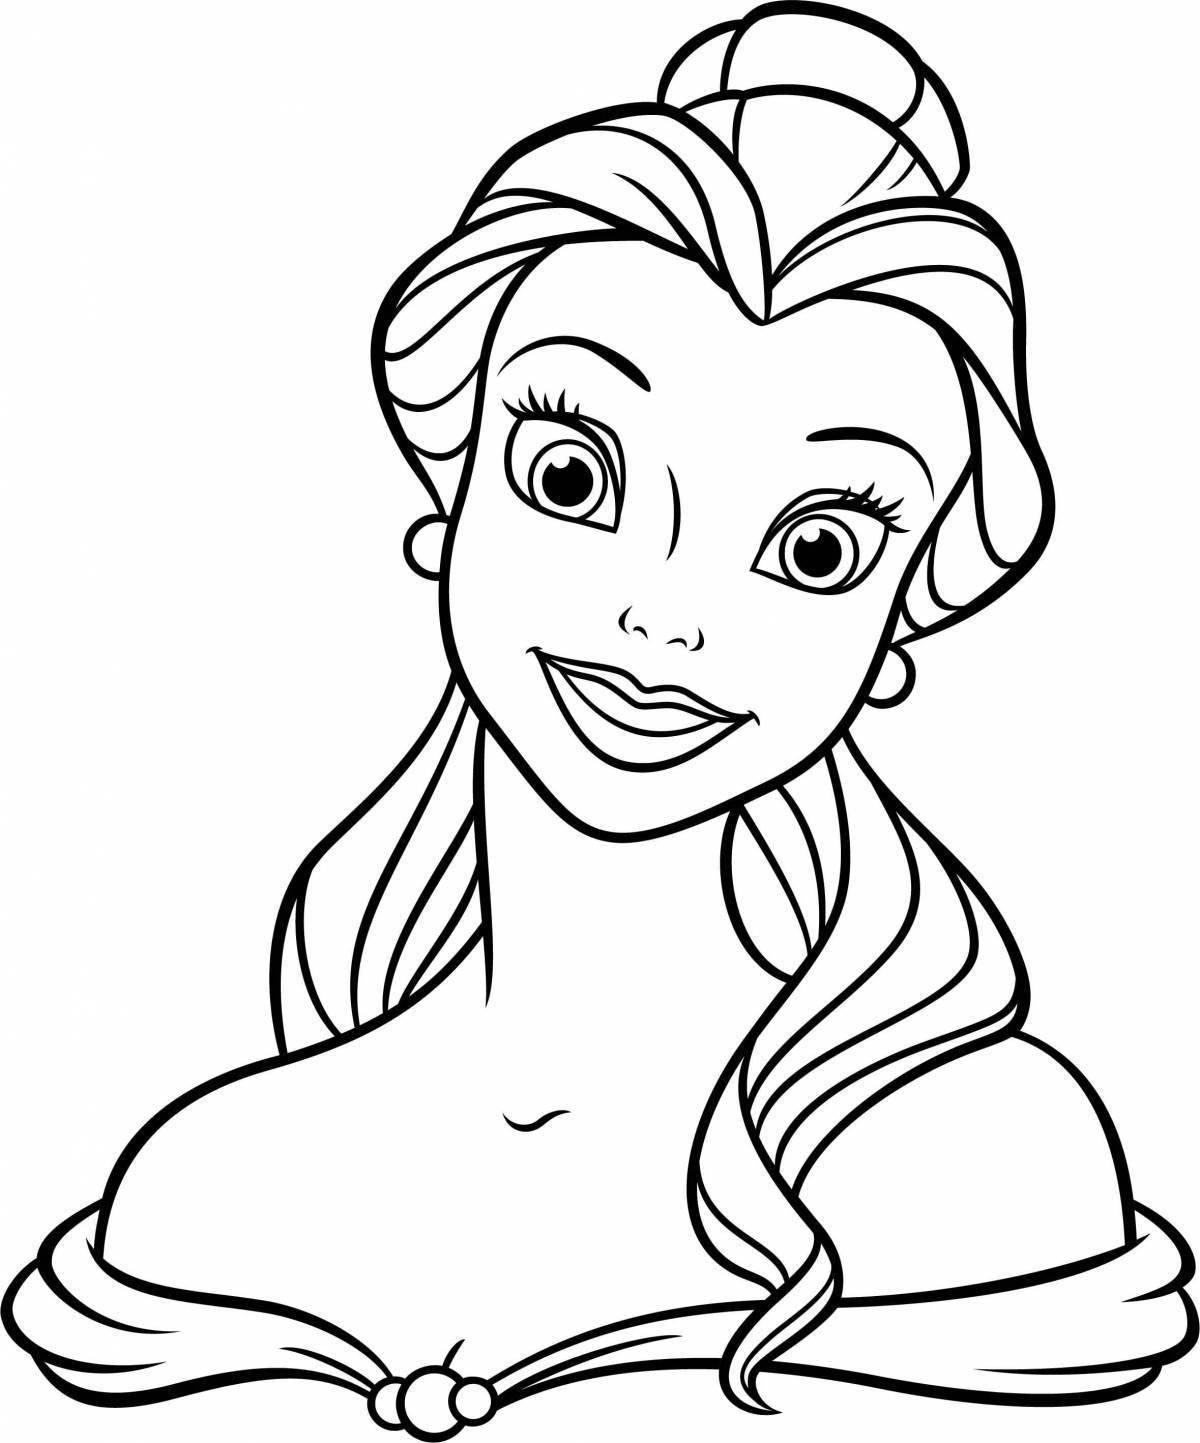 Coloring page charming bella chao